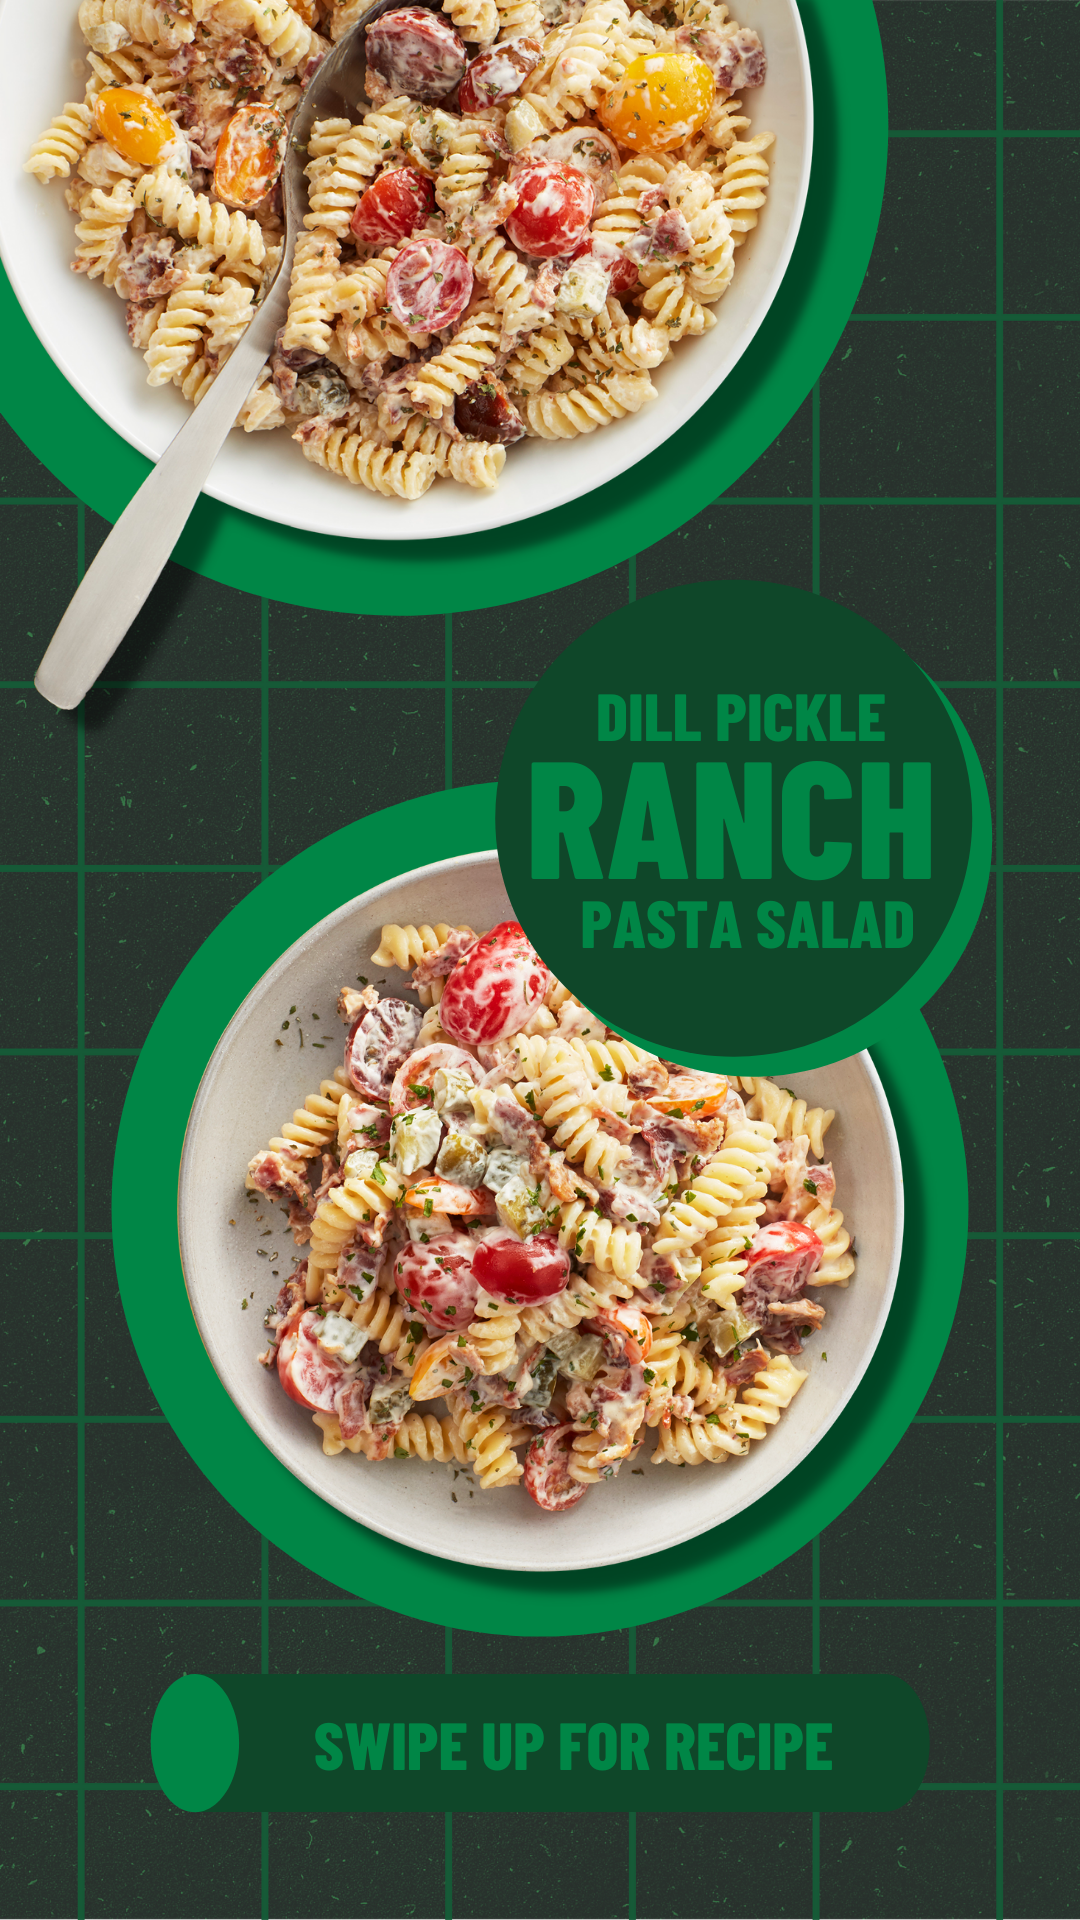 HVR_FY21_Dill_Pickle_Ranch_Pasta_Salad_9X6.png